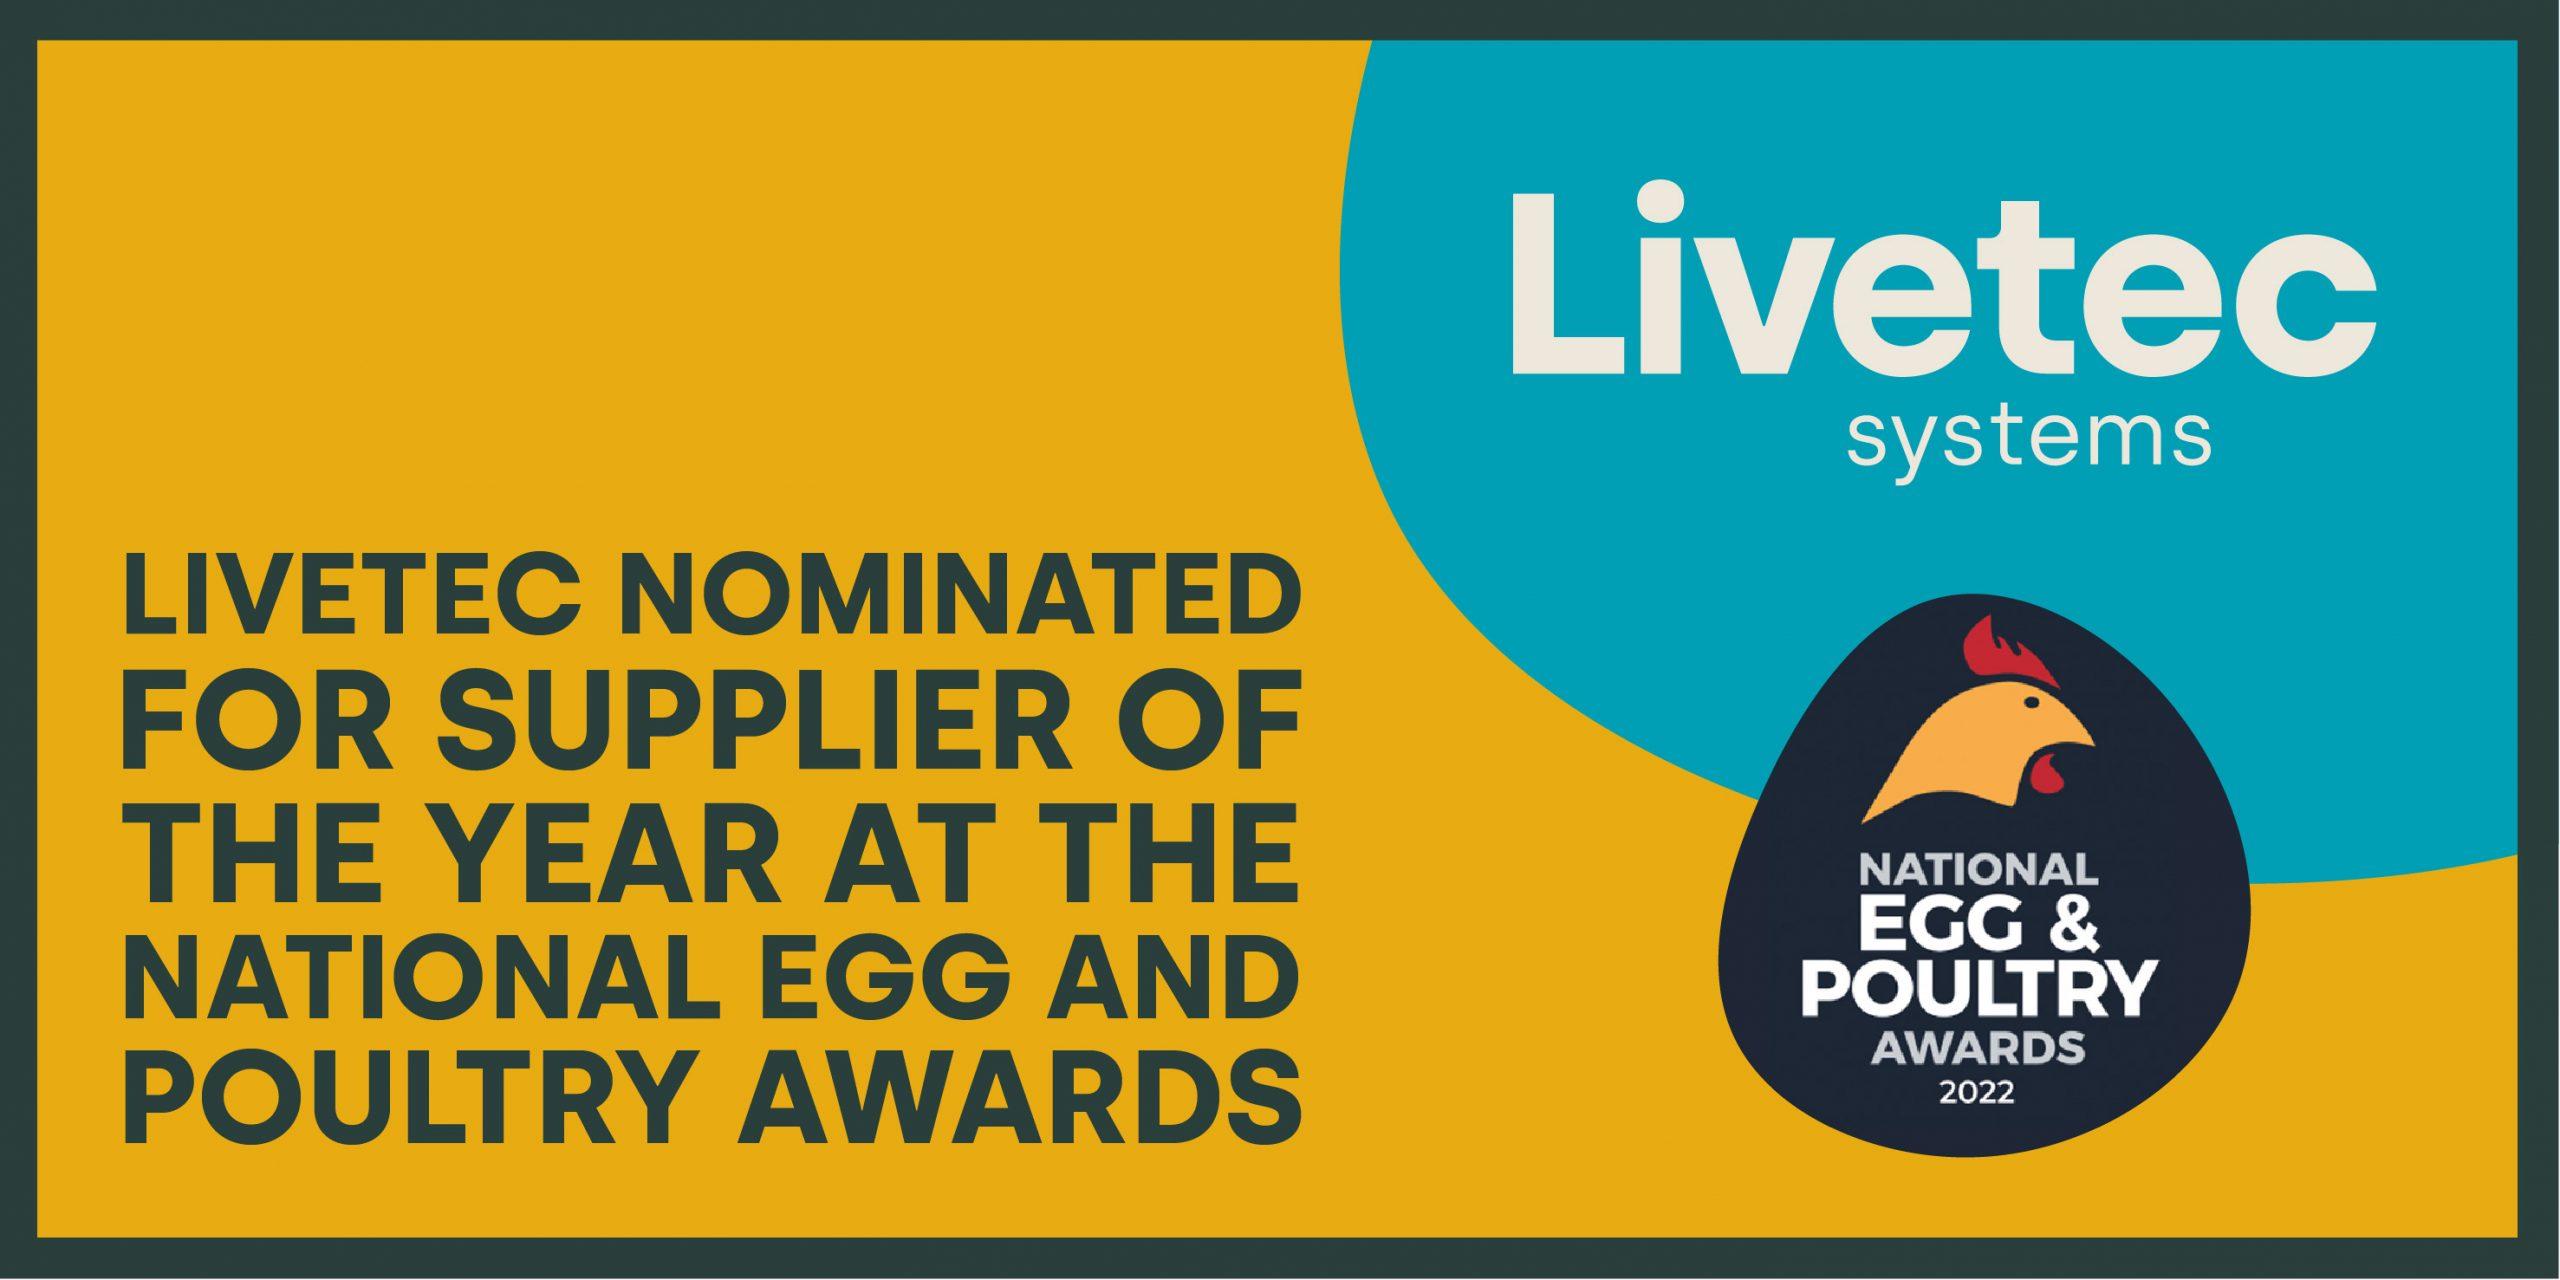 Livetec nominated for Supplier of the year 2022 blog post